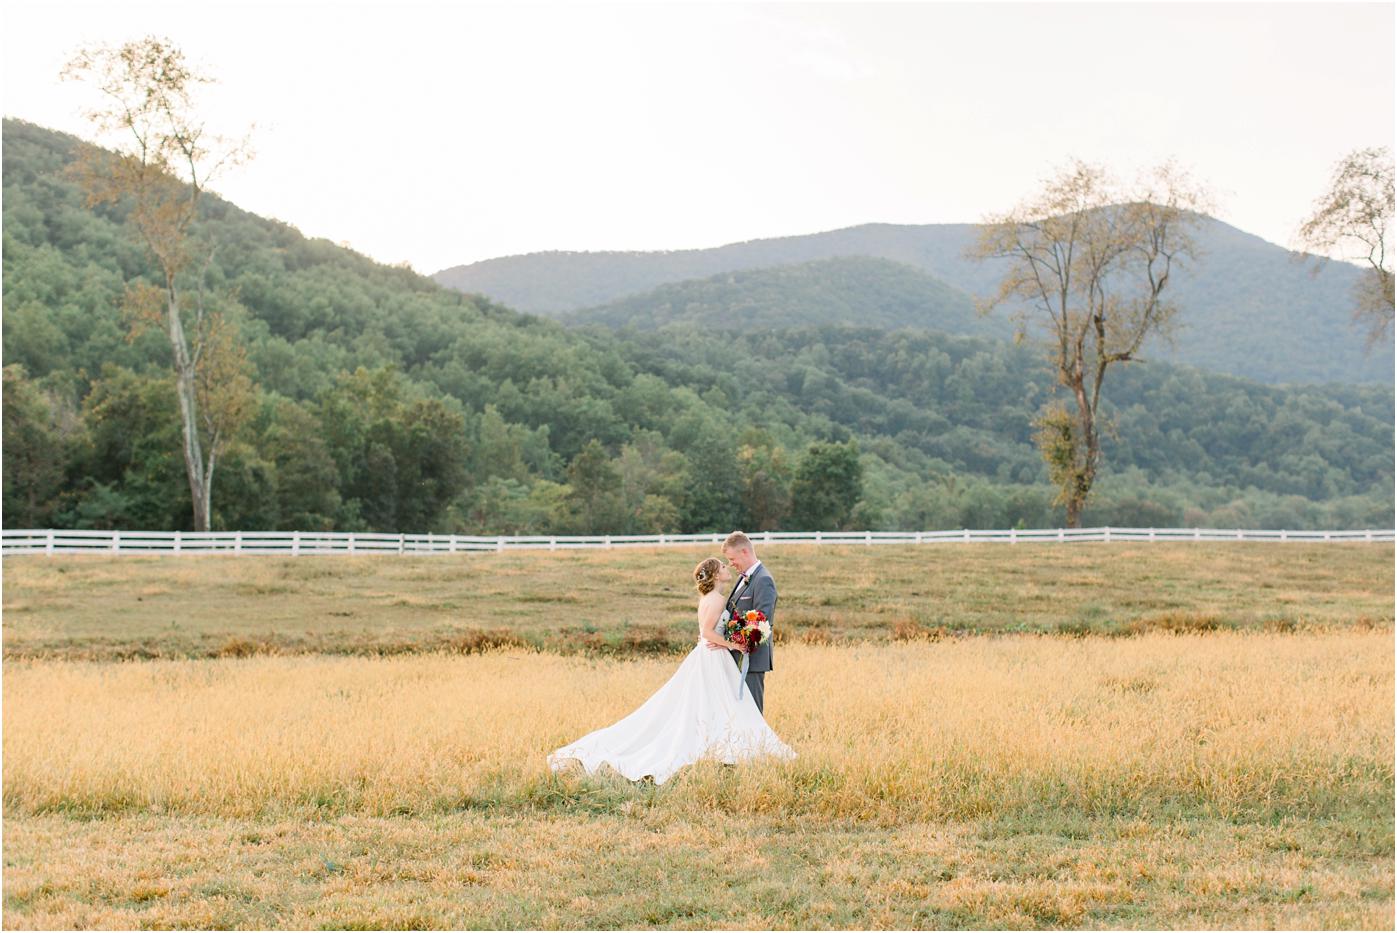 Bride and groom wedding portrait in a field with a mountain backdrop during their Pharsalia wedding day